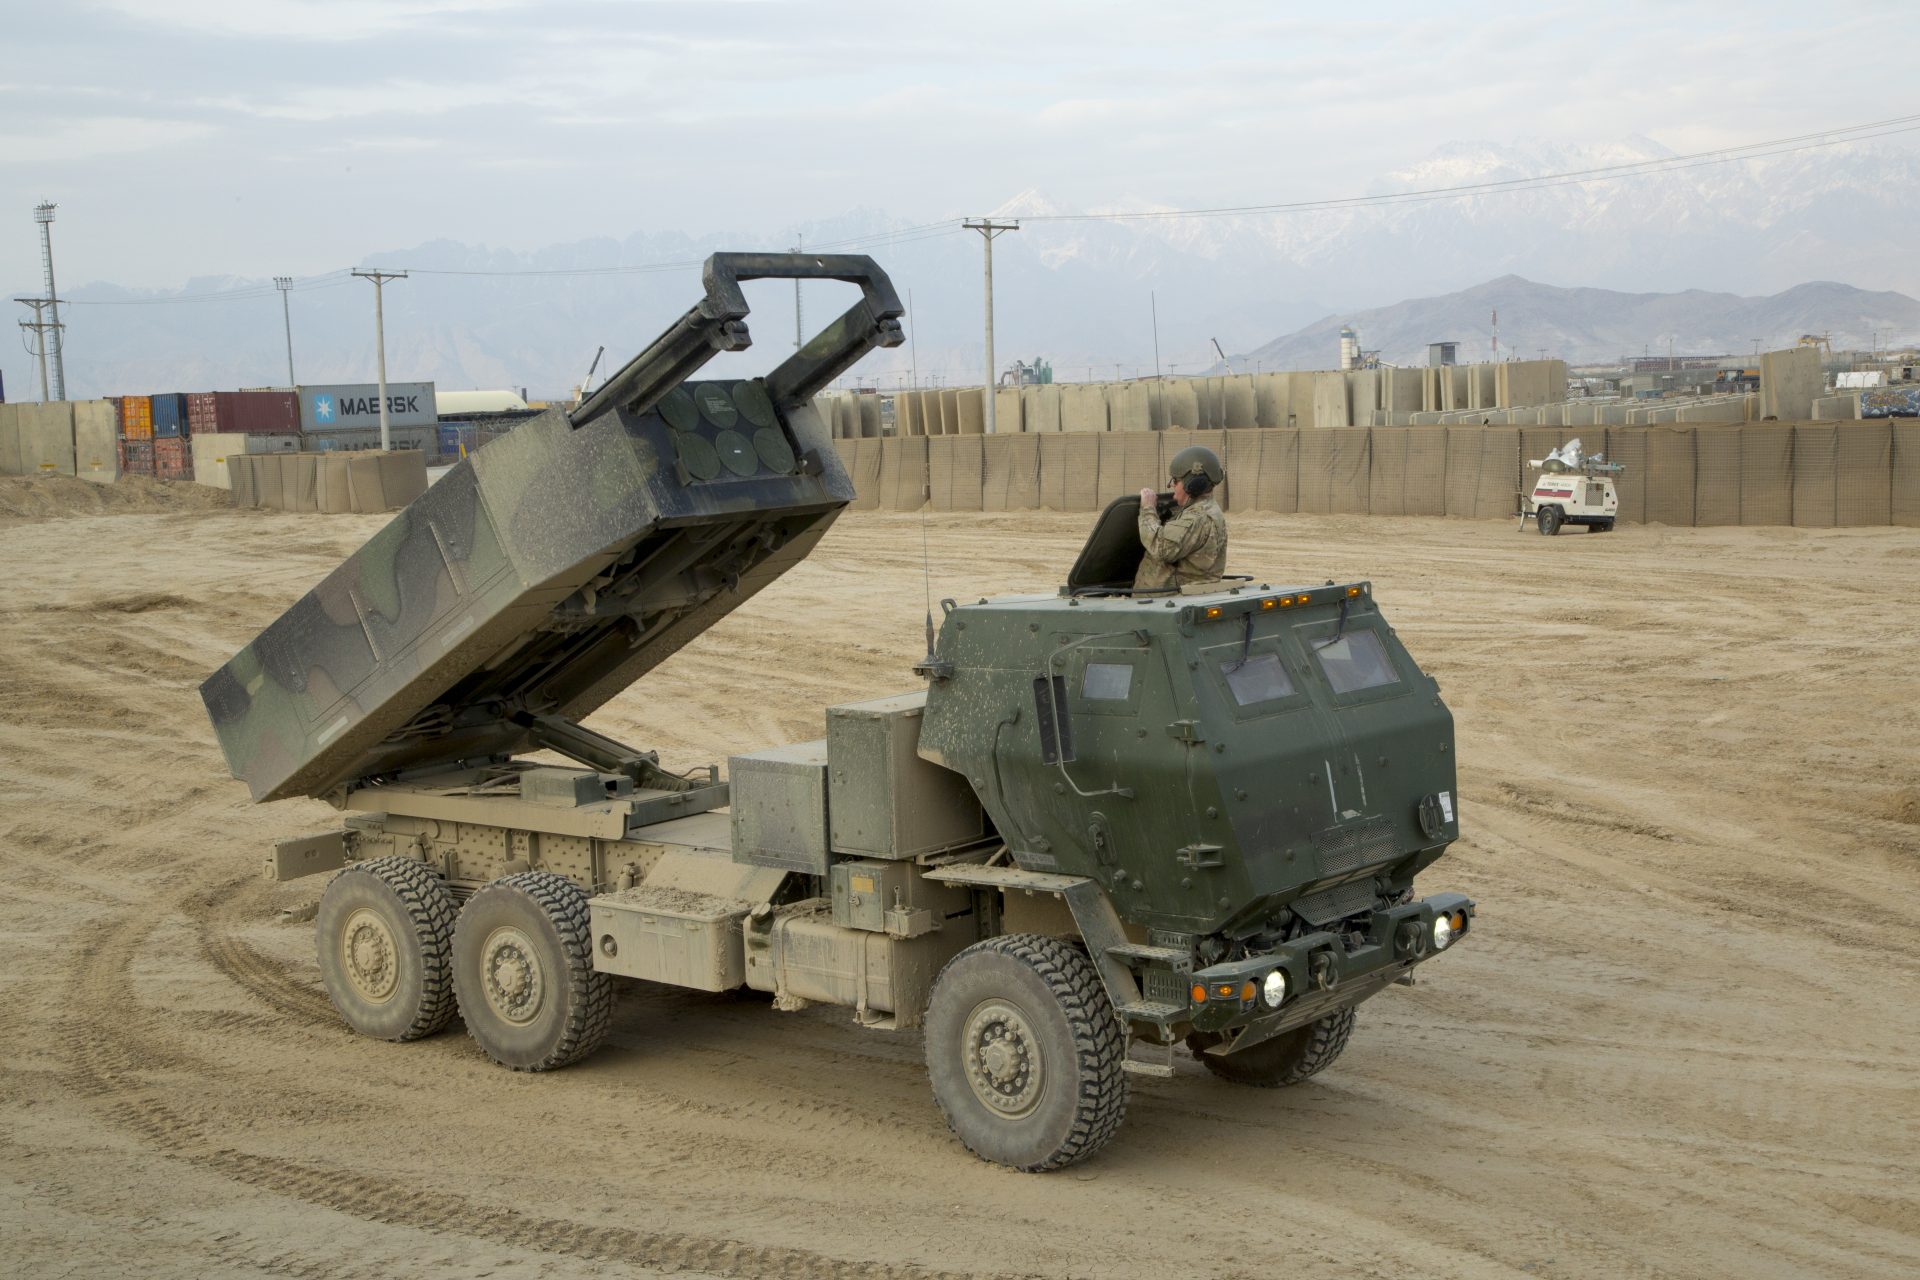 The Army’s Precision Strike Missile